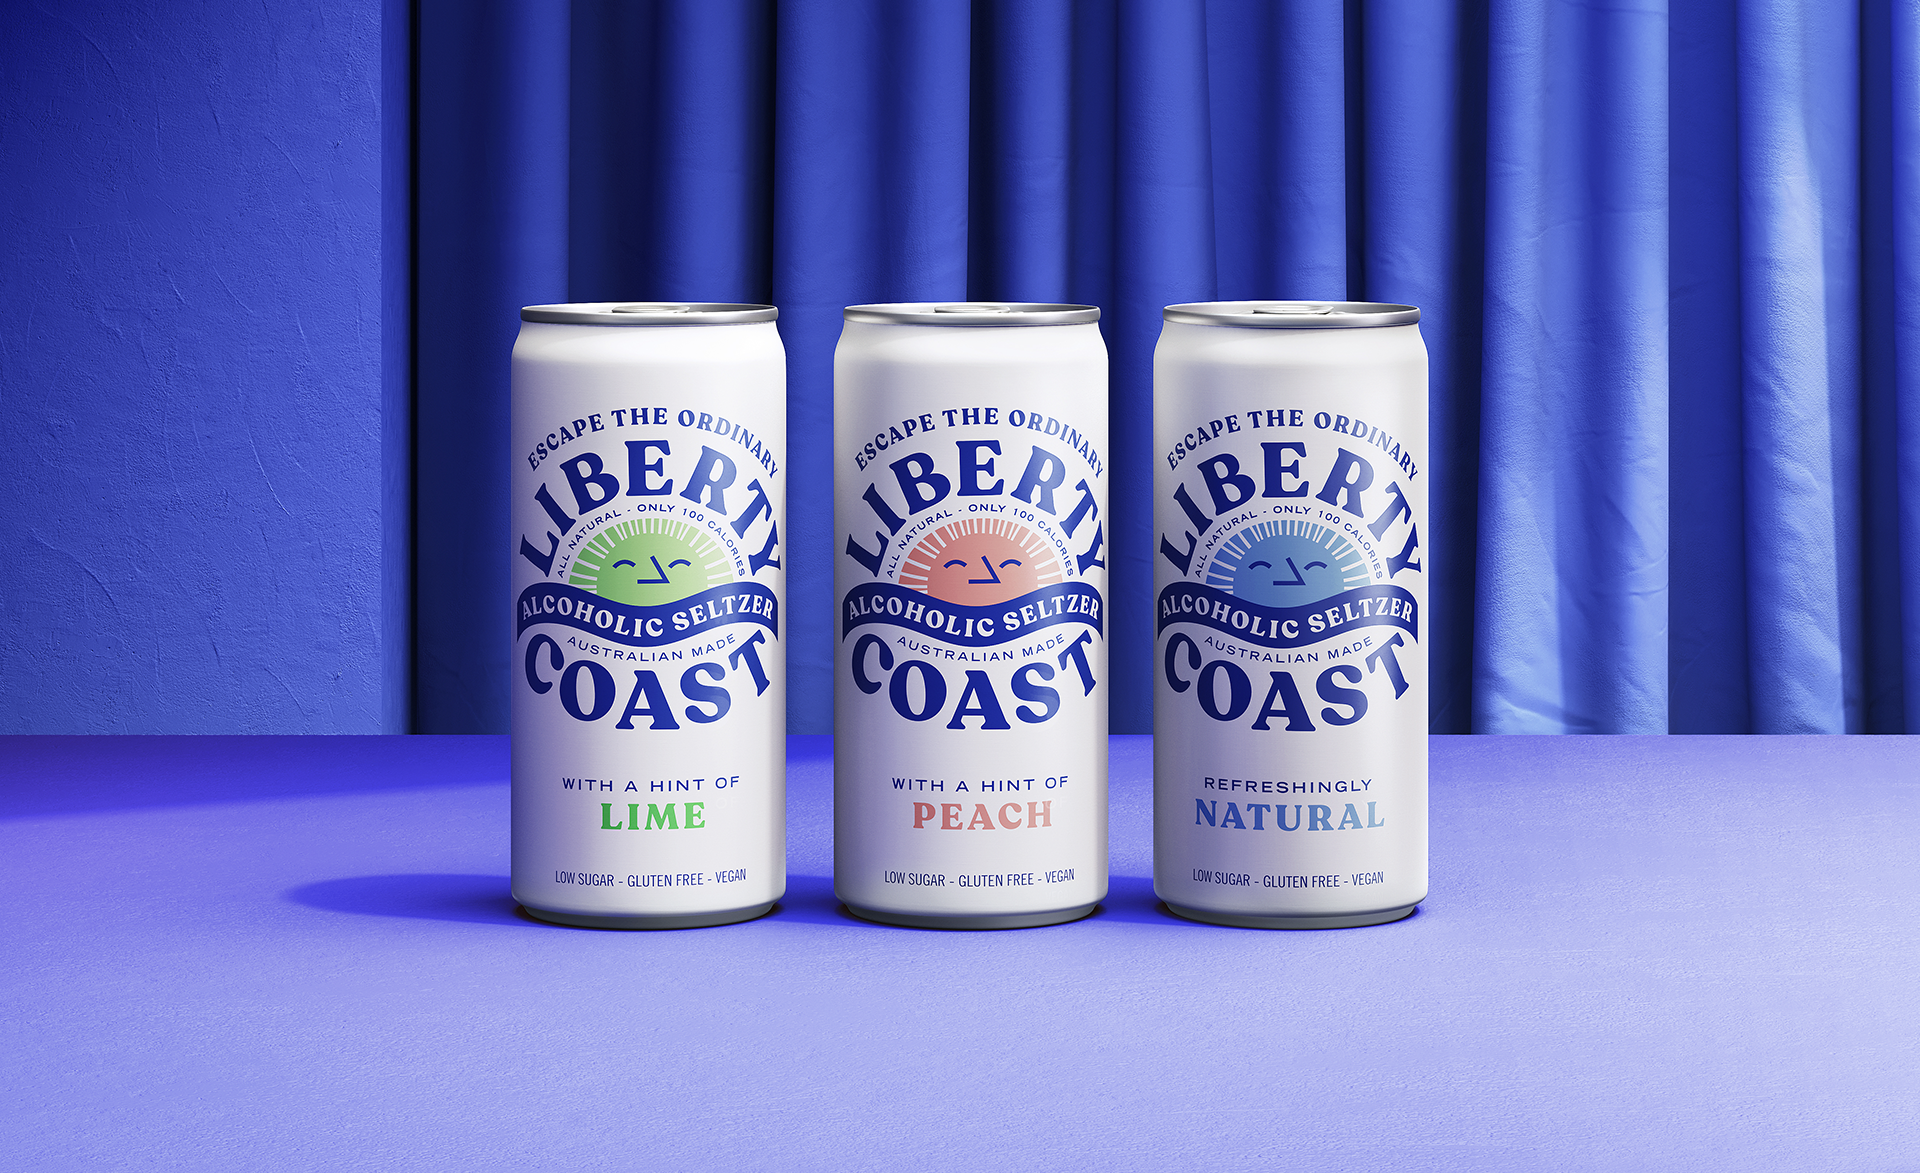 Liberty Coast Alcoholic Seltzer packaging design by Our Revolution brand design agency in front of a bright blue curtain